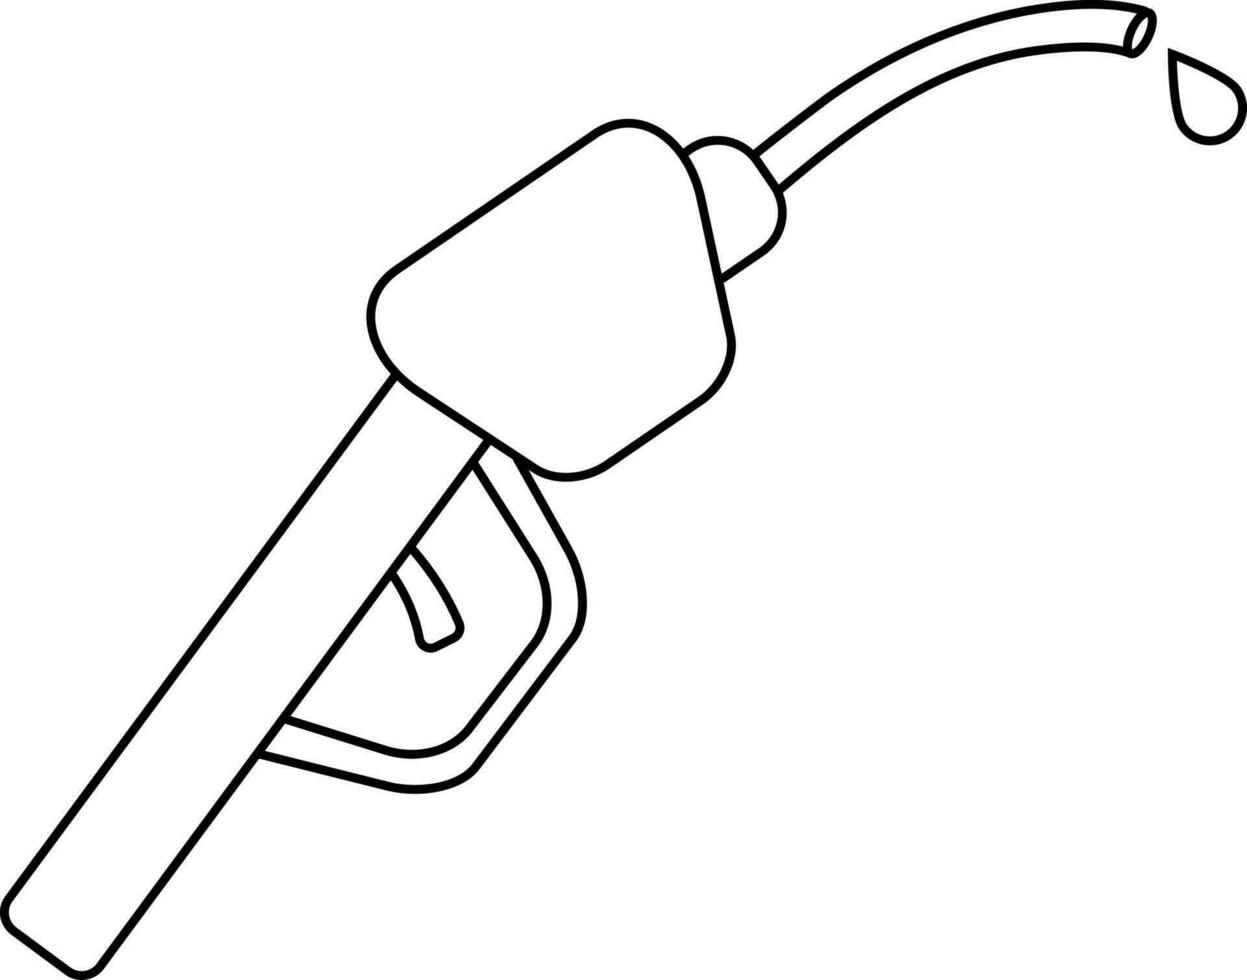 Isolated fuel pump with drop in black line art. vector